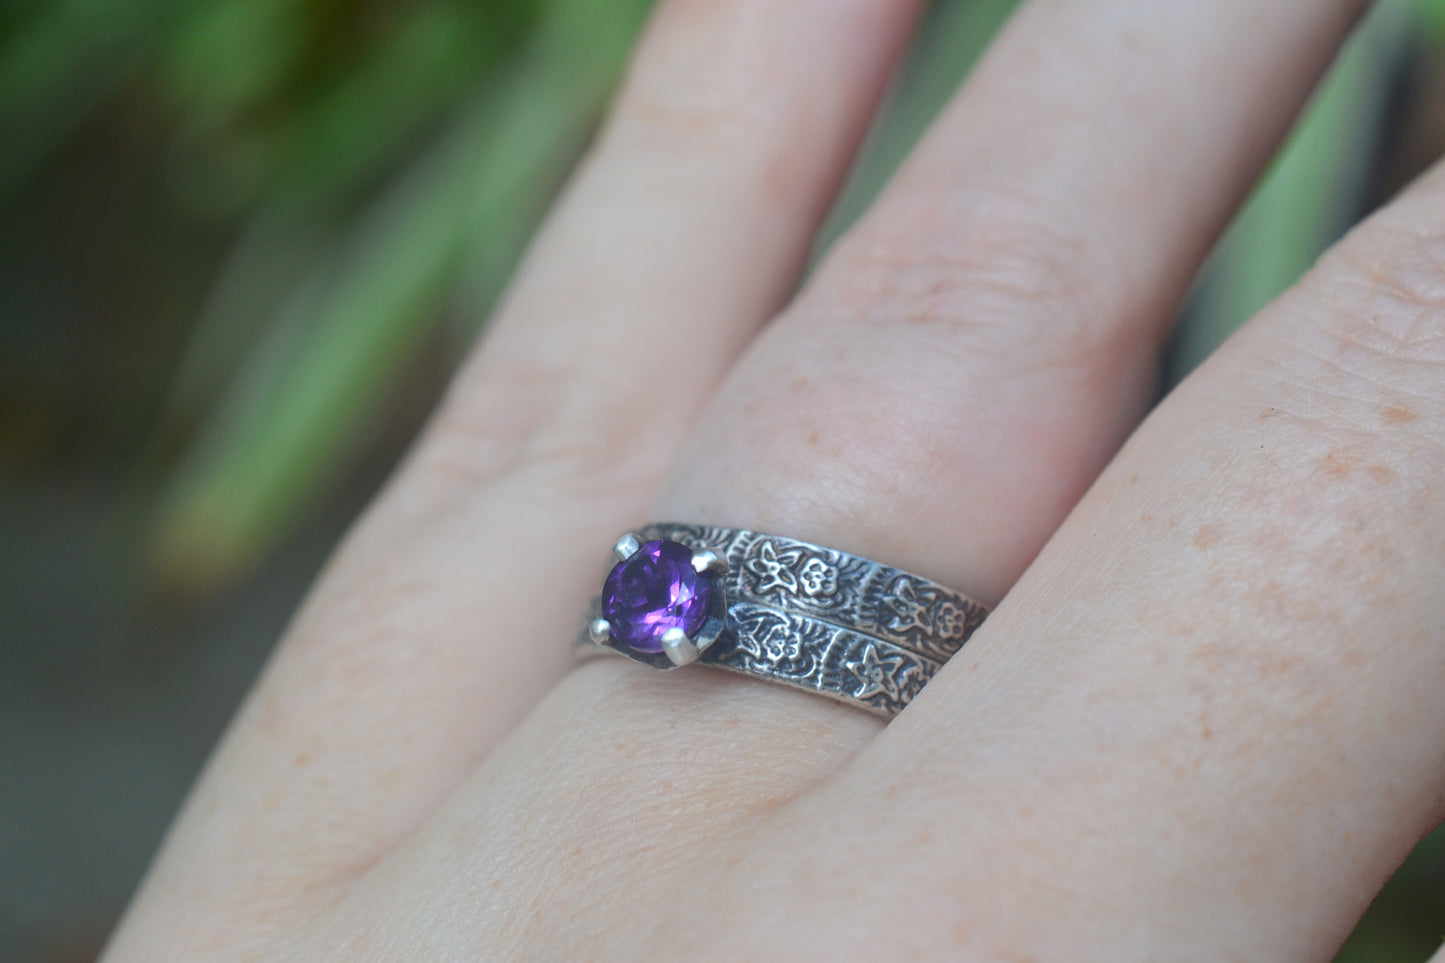 Floral Patterned Bridal Ring Set With Amethyst